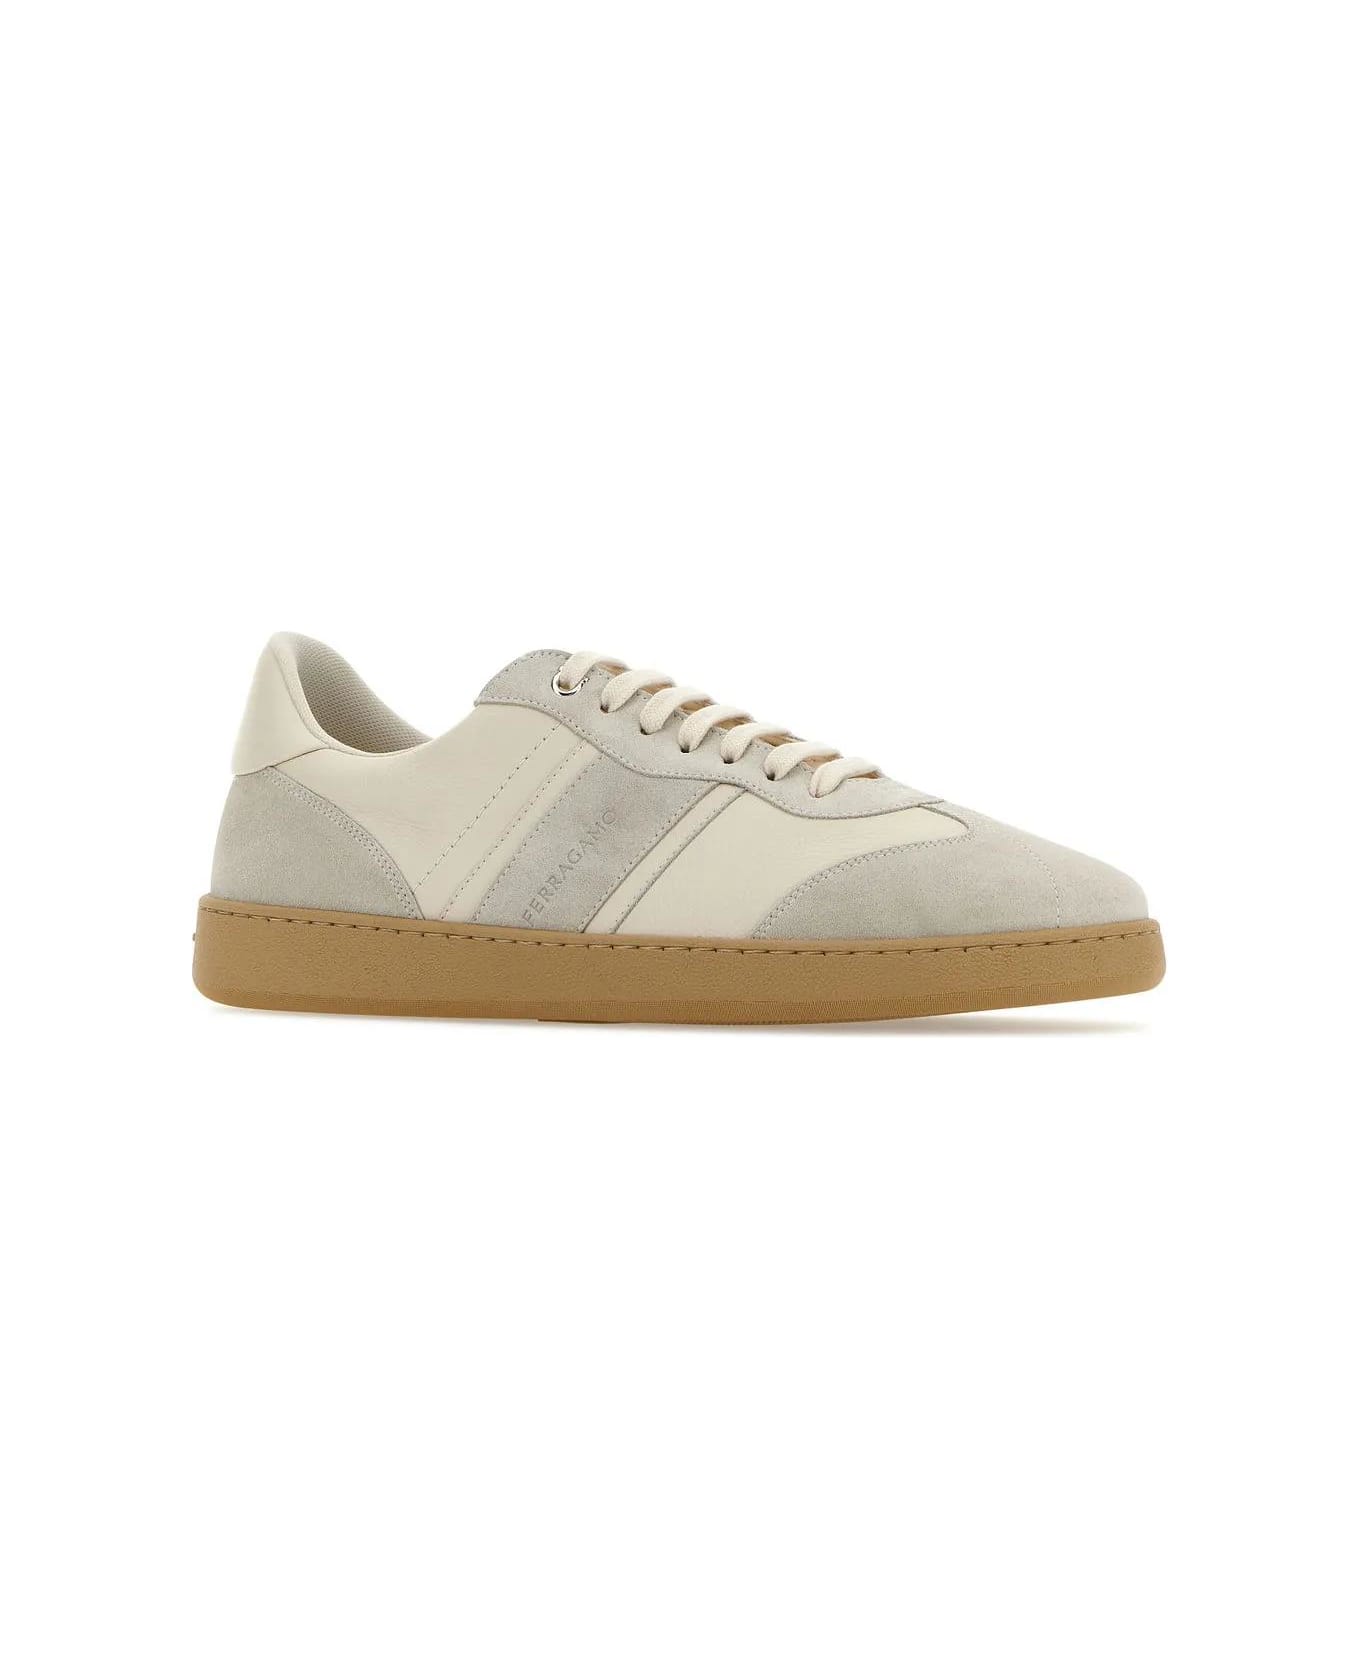 Ferragamo Two-tone Leather And Suede Achille Sneakers - White スニーカー